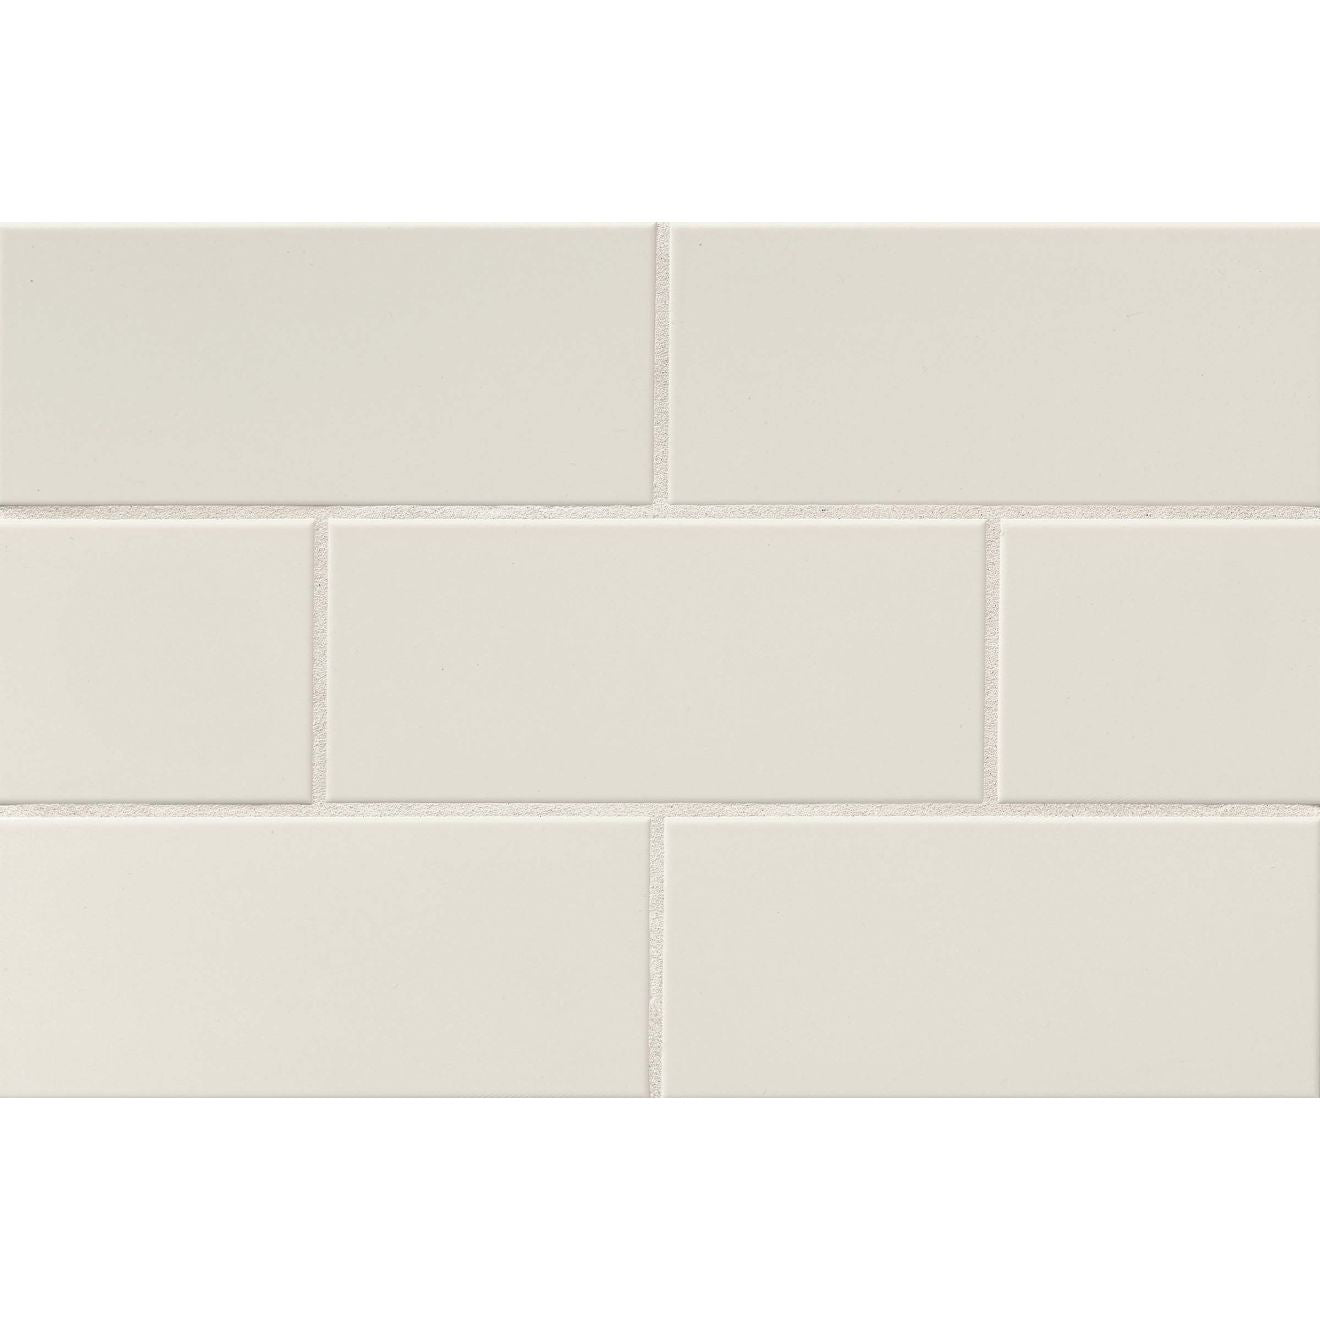 Bedrosians - Traditions 4" x 10" Ceramic Wall Tile - Matte Biscuit